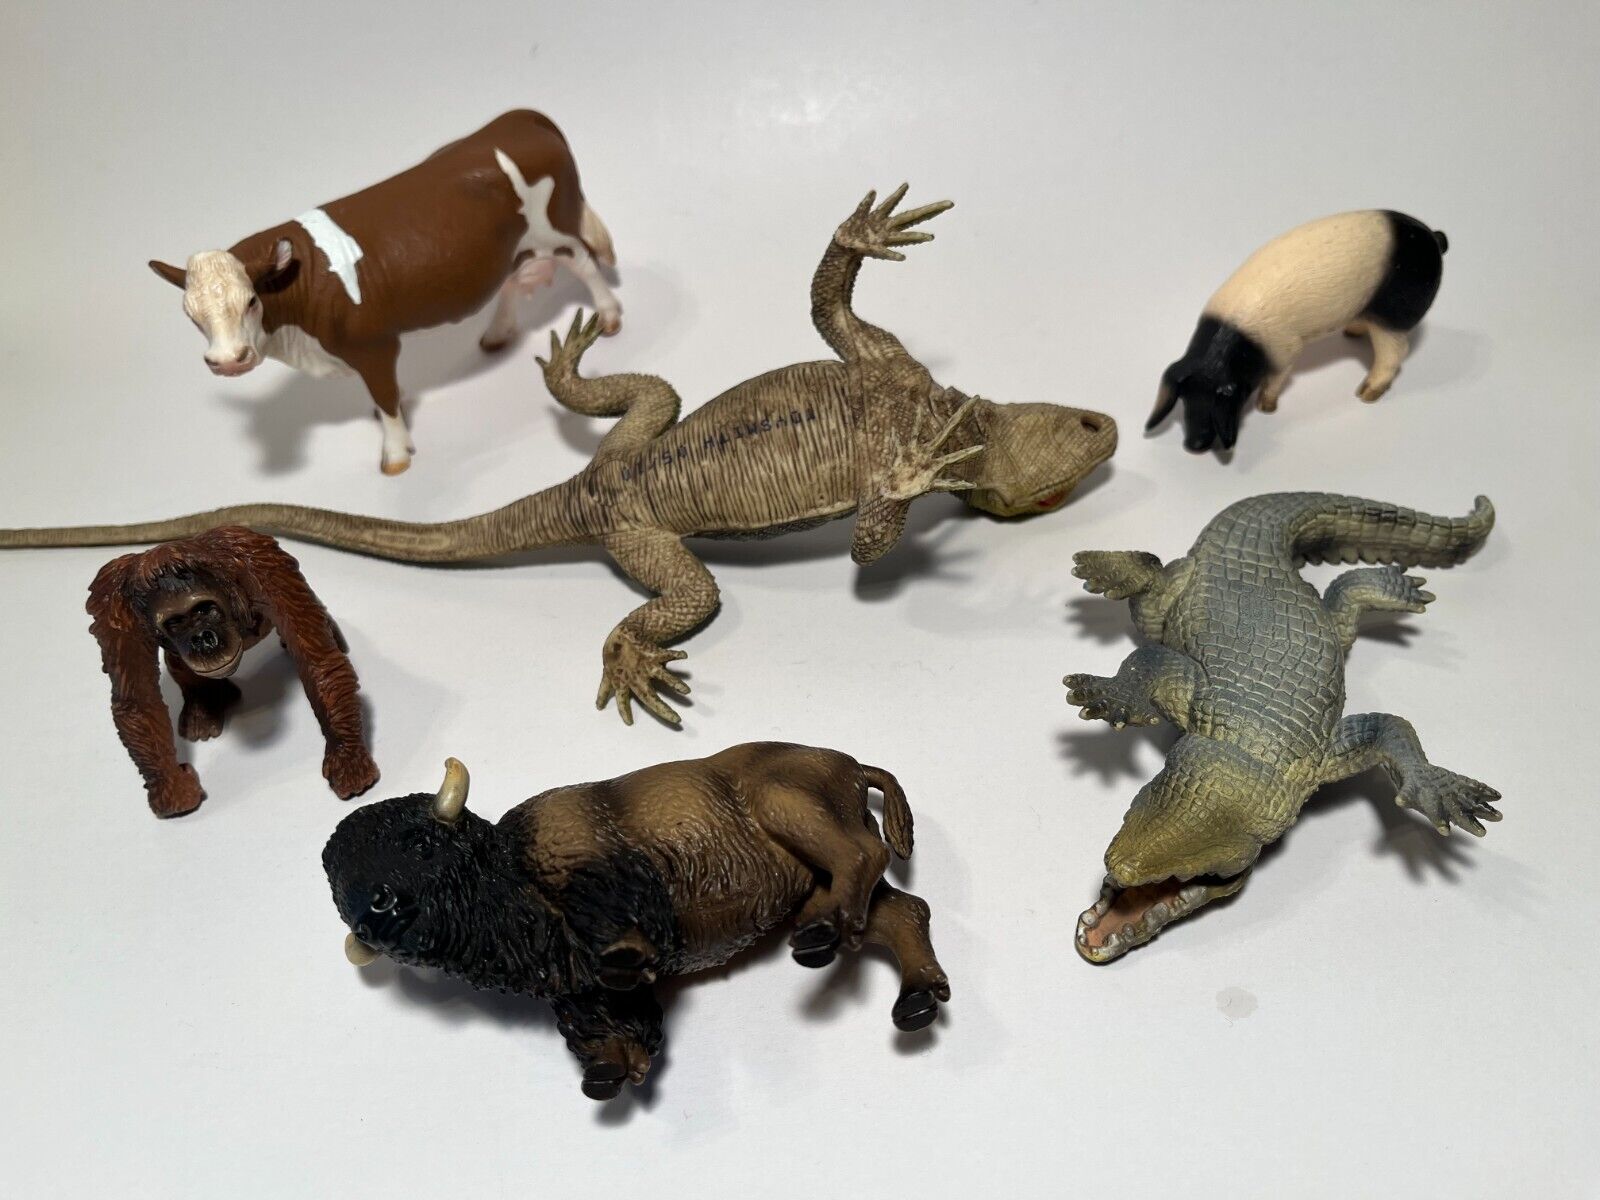 Schleich Germany, TOYSMITH High Quality Realistic Artwork Animals Collection Schleich Germany, TOYSMITH Schleich Germany - фотография #9